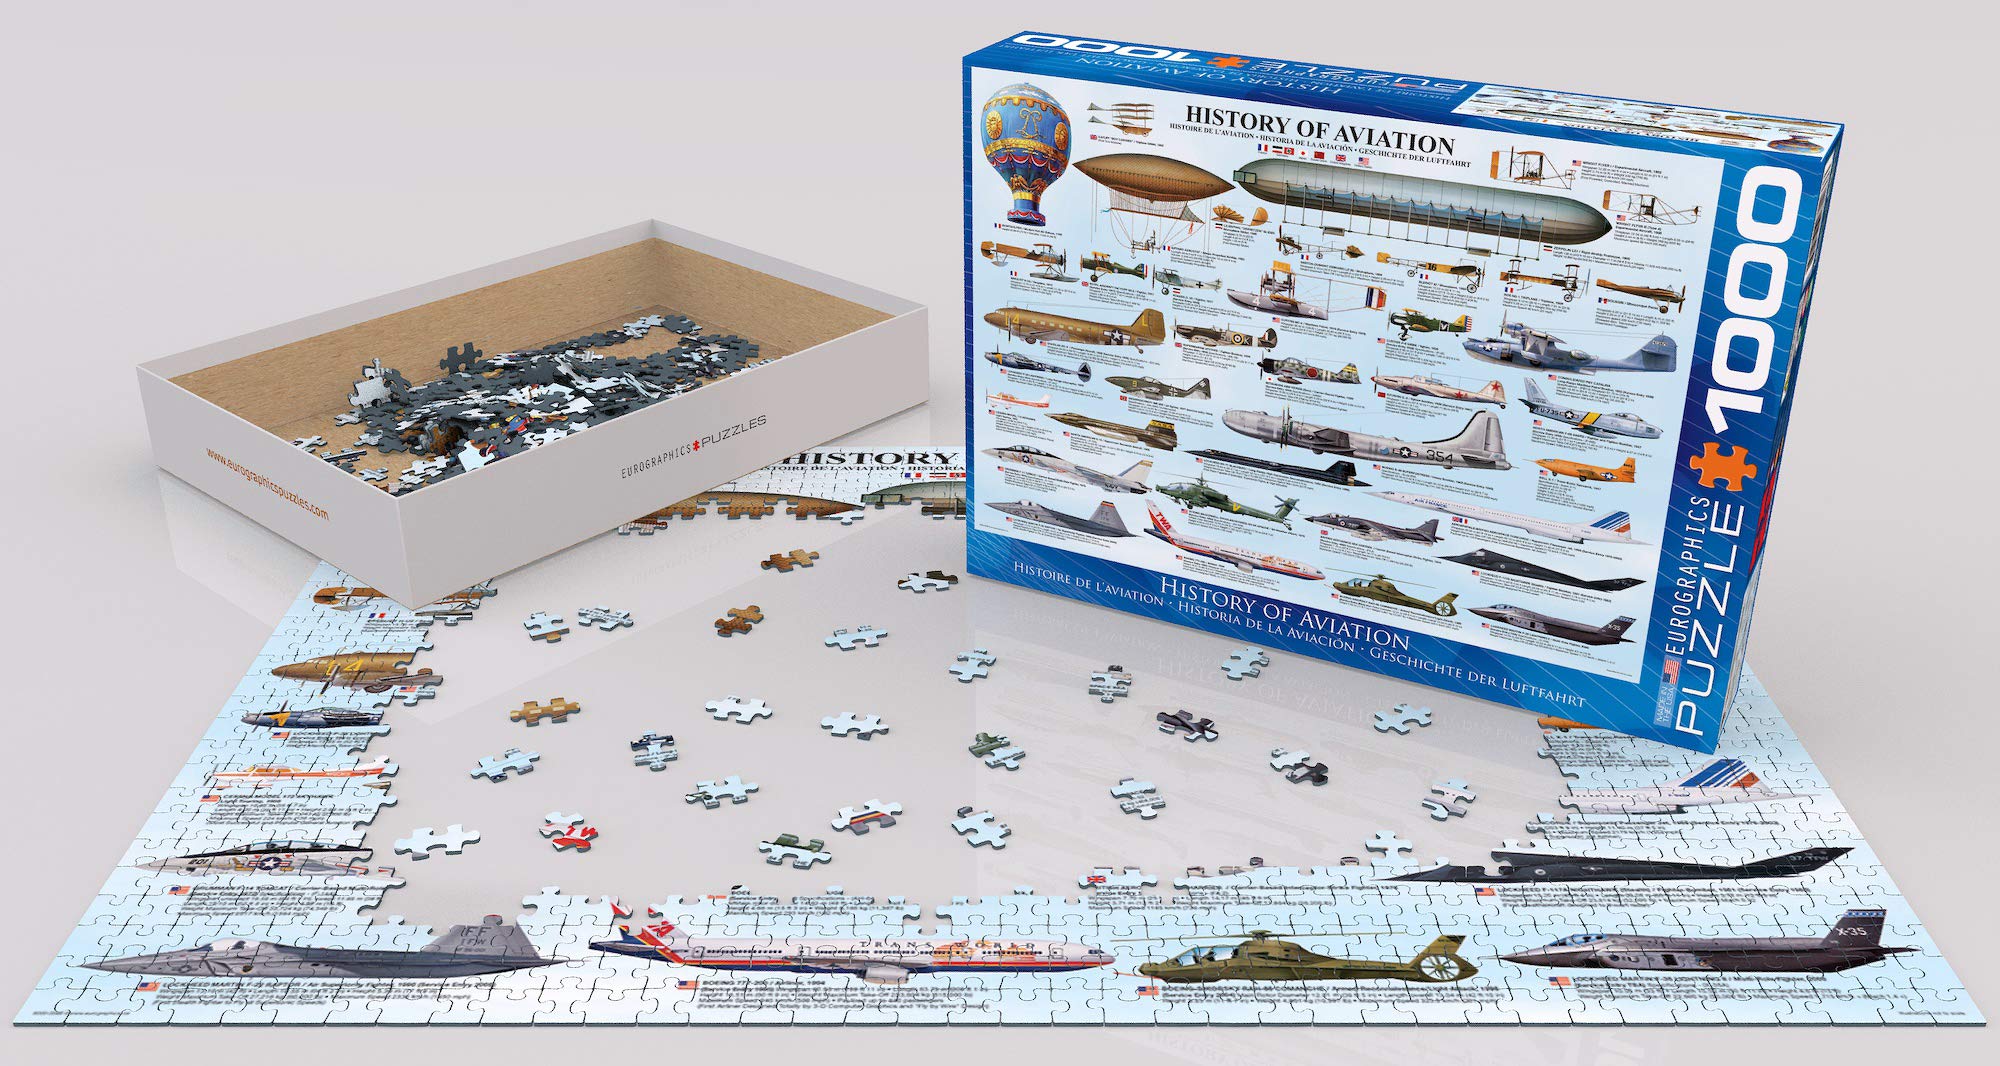 EuroGraphics History of Aviation Puzzle (1000-Piece)